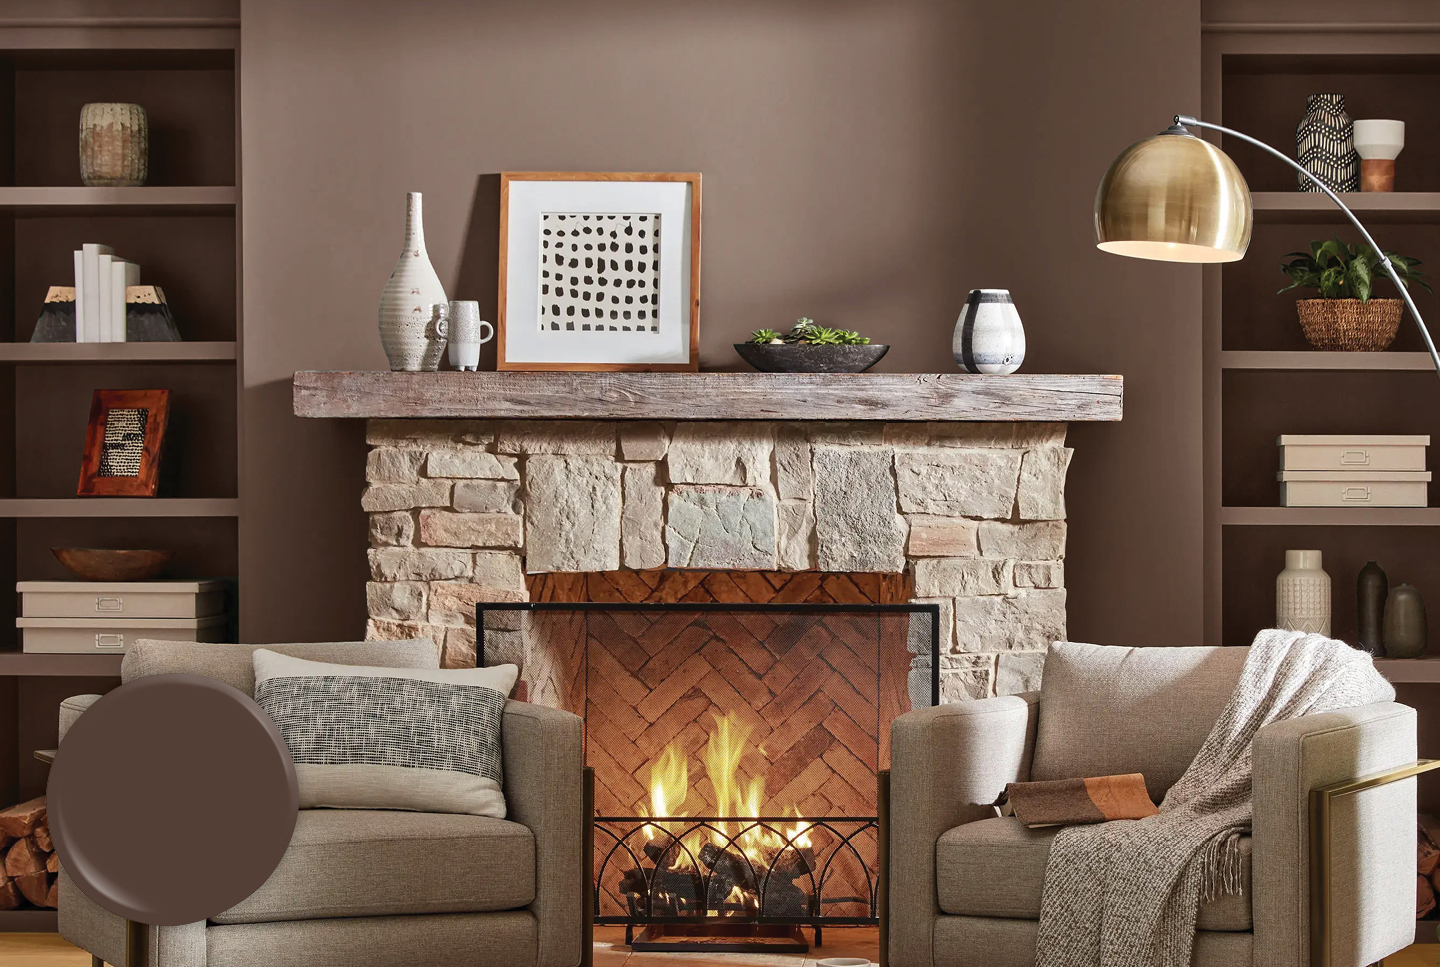 Stone fireplace with wood mantel against a Cabin Plank wall. A soft blanket is strewn on one of two upholstered chairs. 